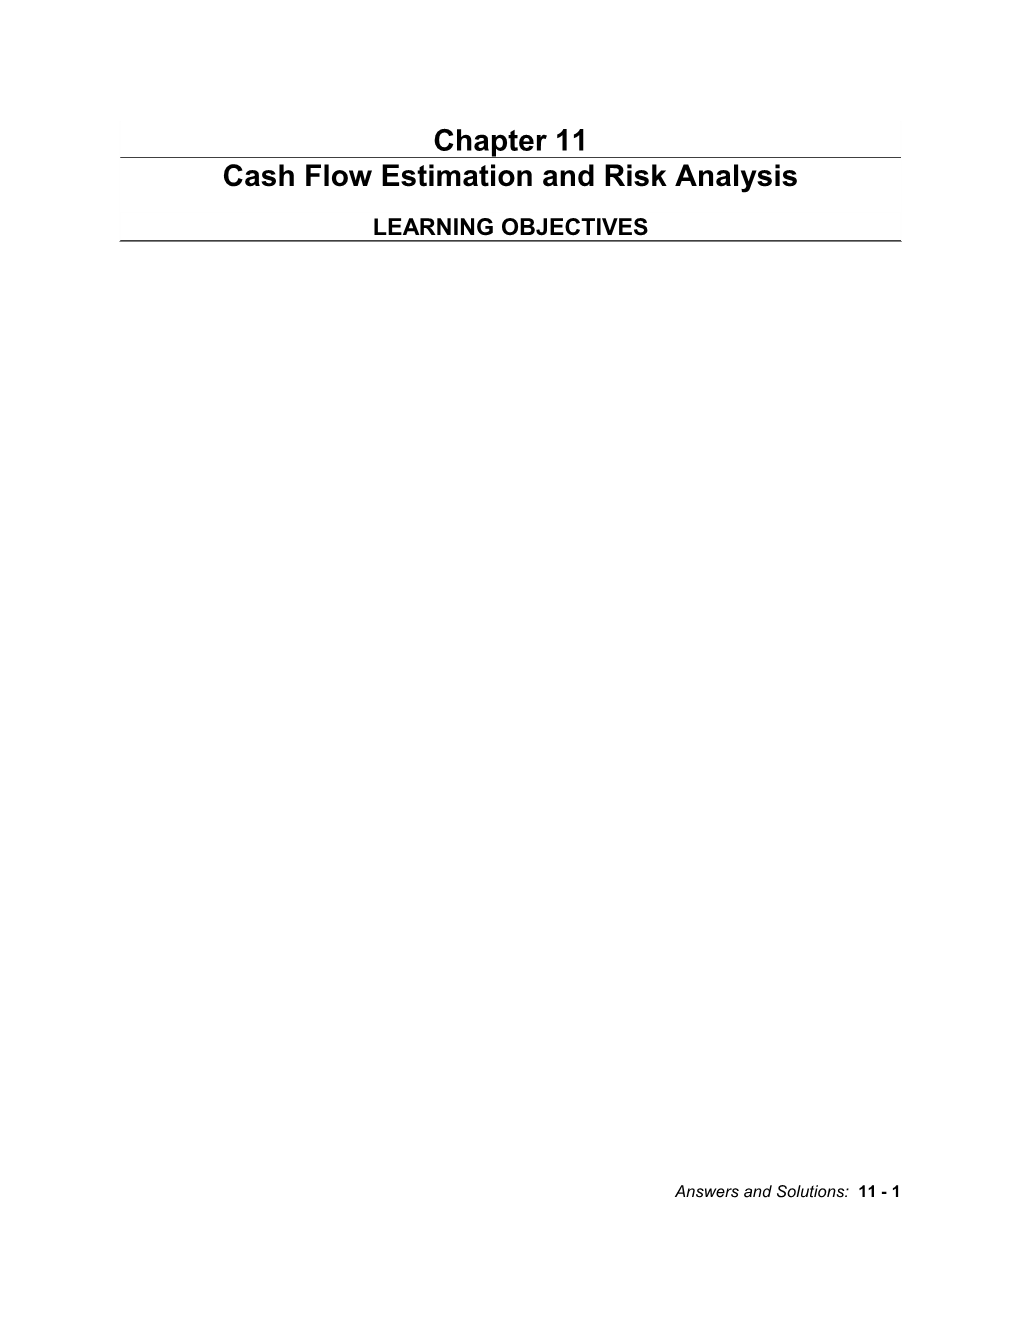 Cash Flow Estimation and Risk Analysis